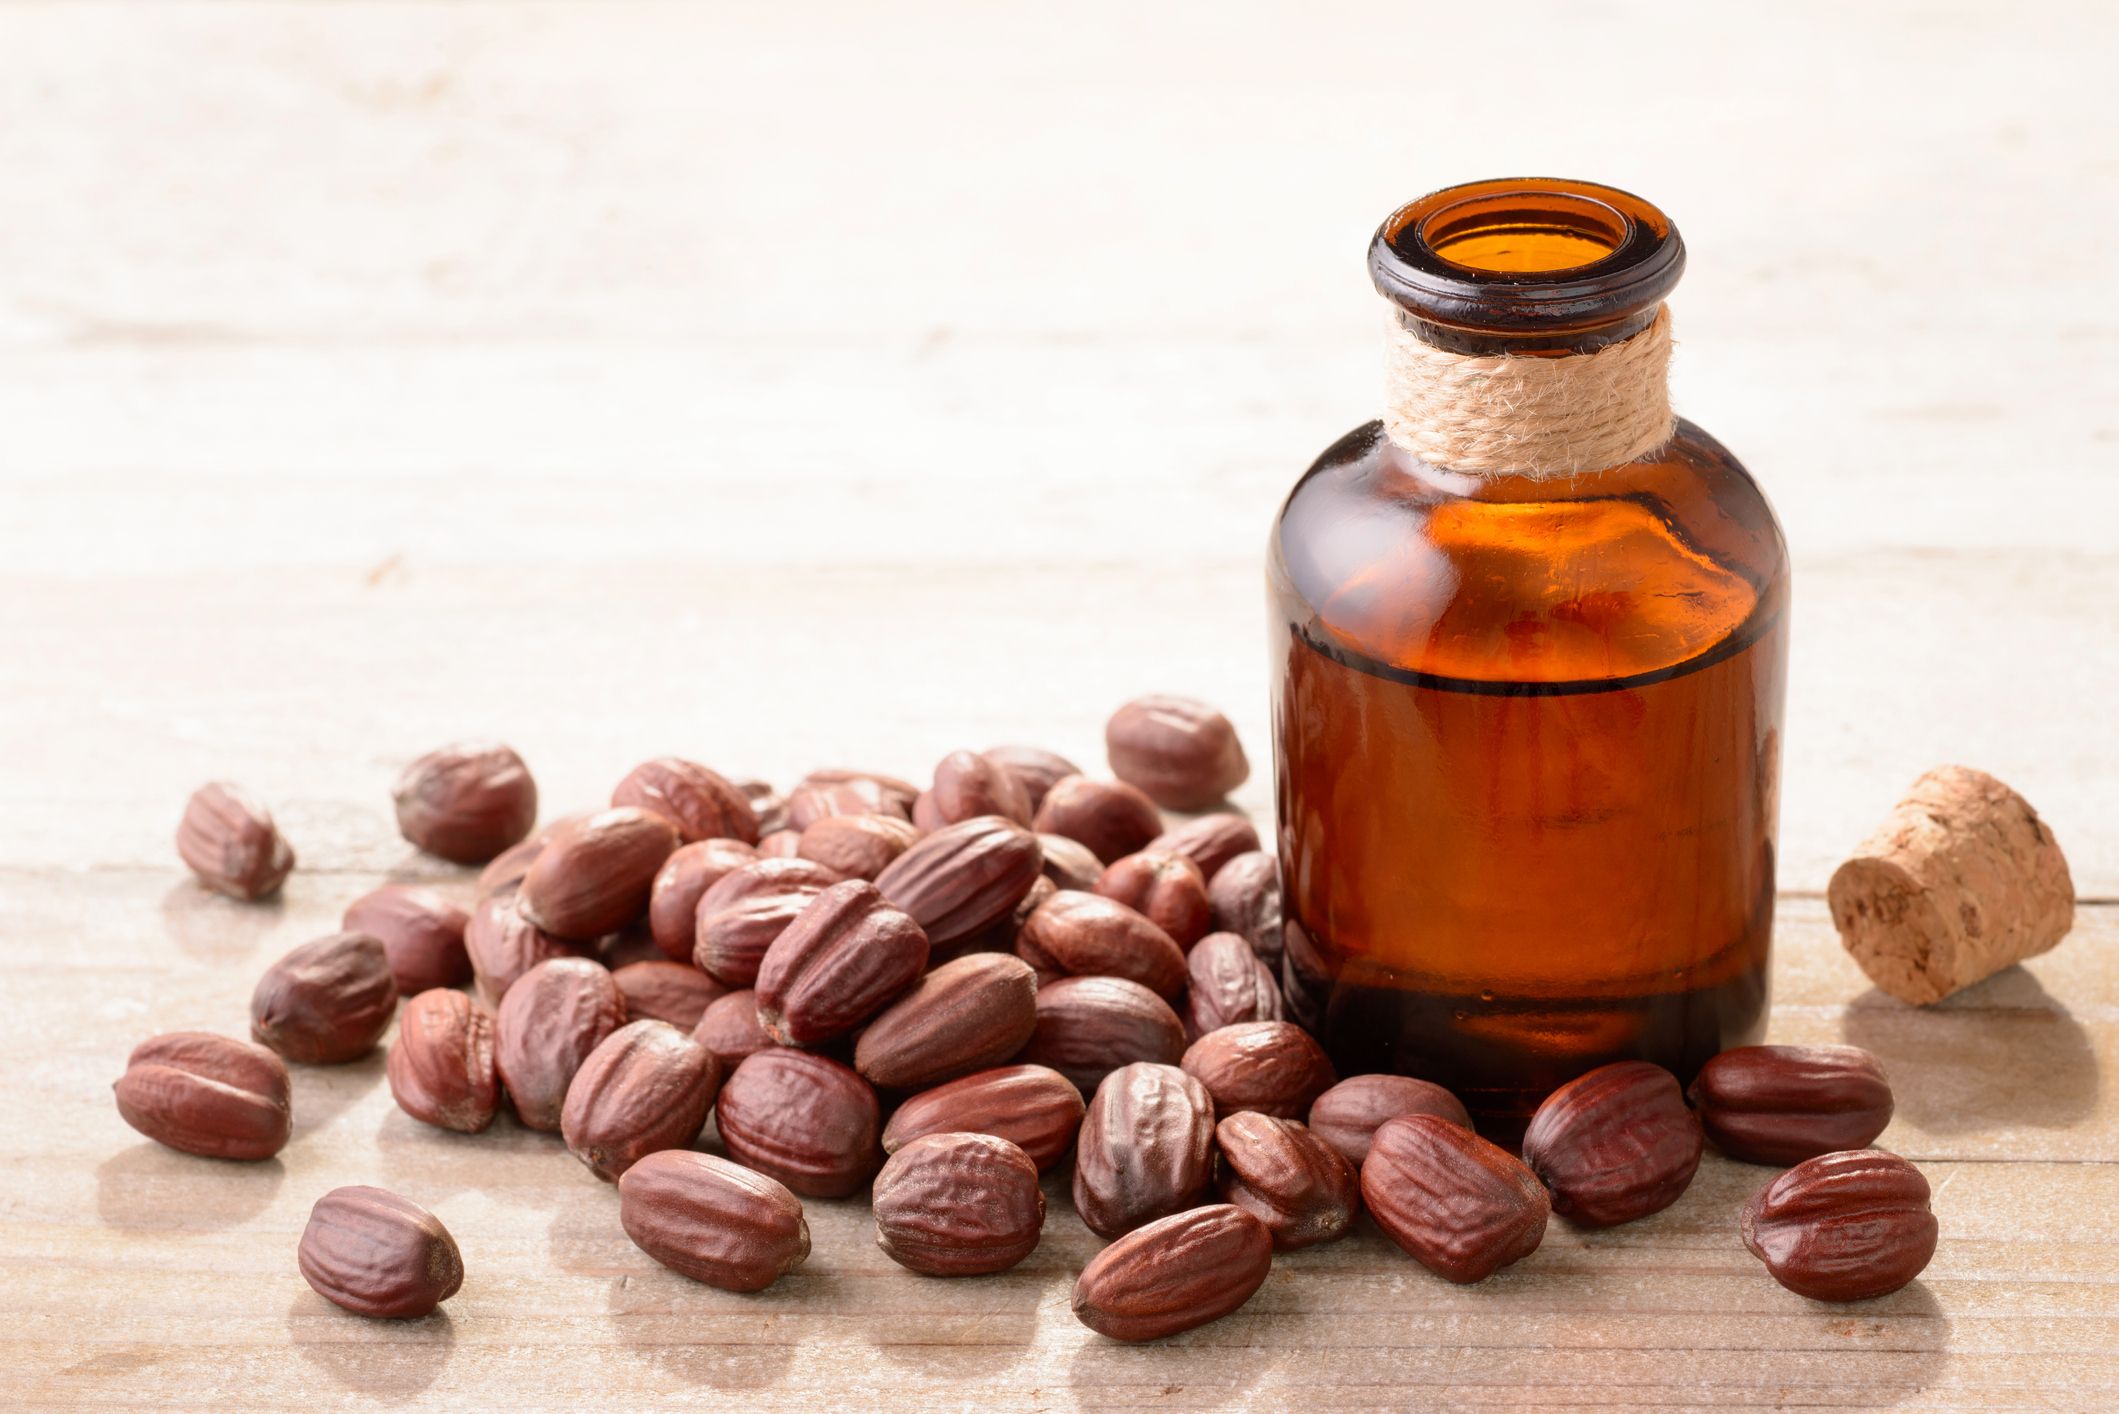 You are currently viewing 100 uses of jojoba oil